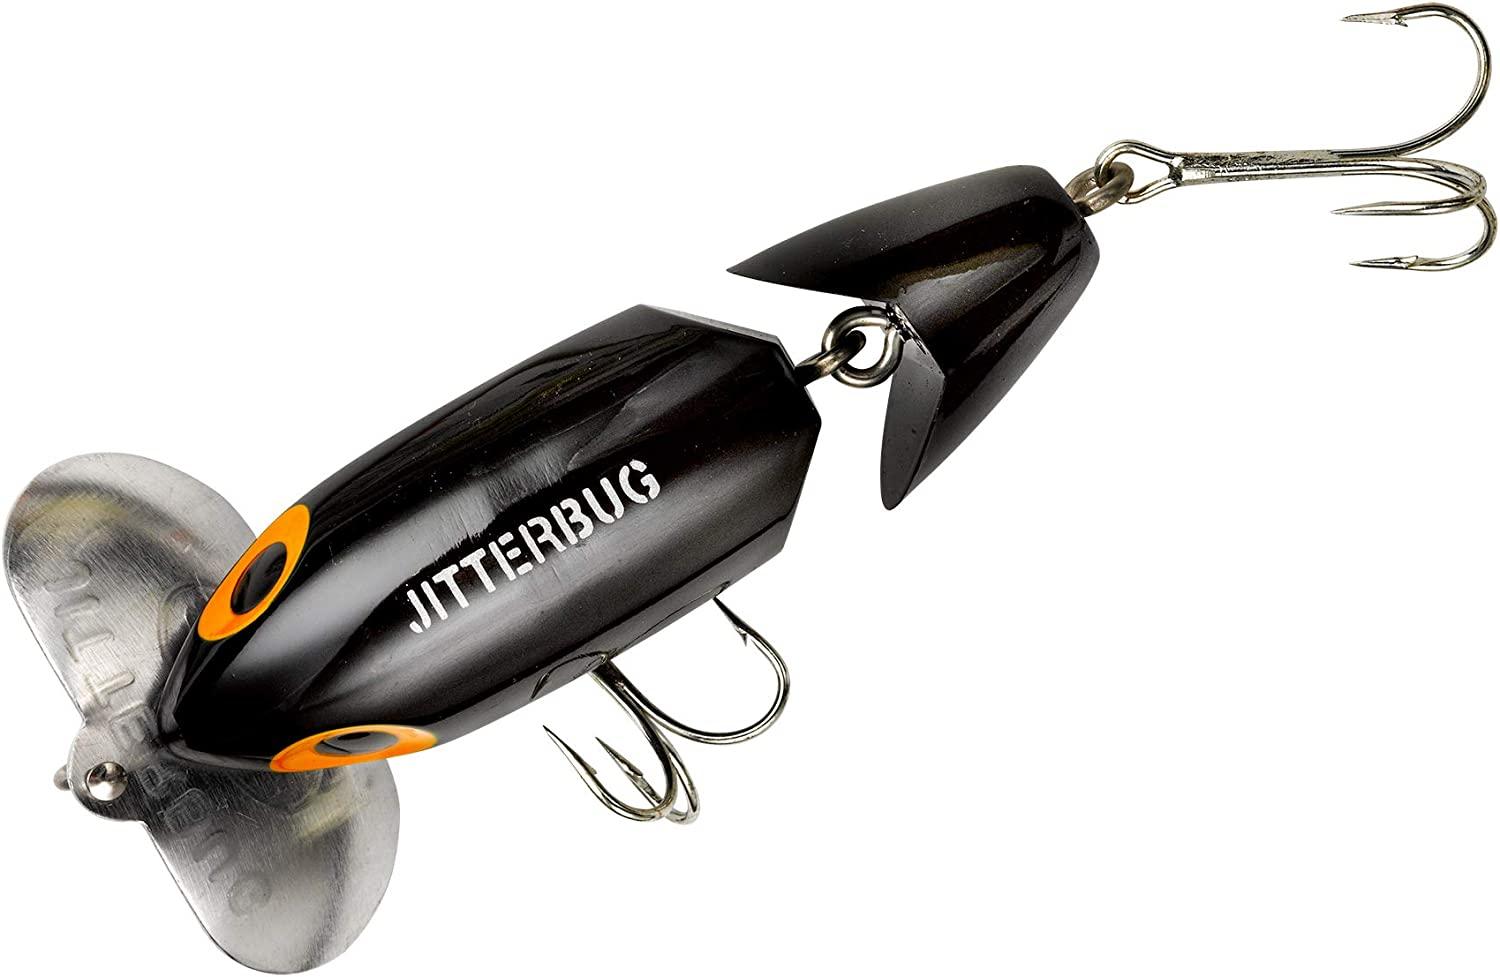 Arbogast Jitterbug Topwater Bass Fishing Lure - Excellent for Night Fishing  G650 (3 in, 5/8 oz) Black